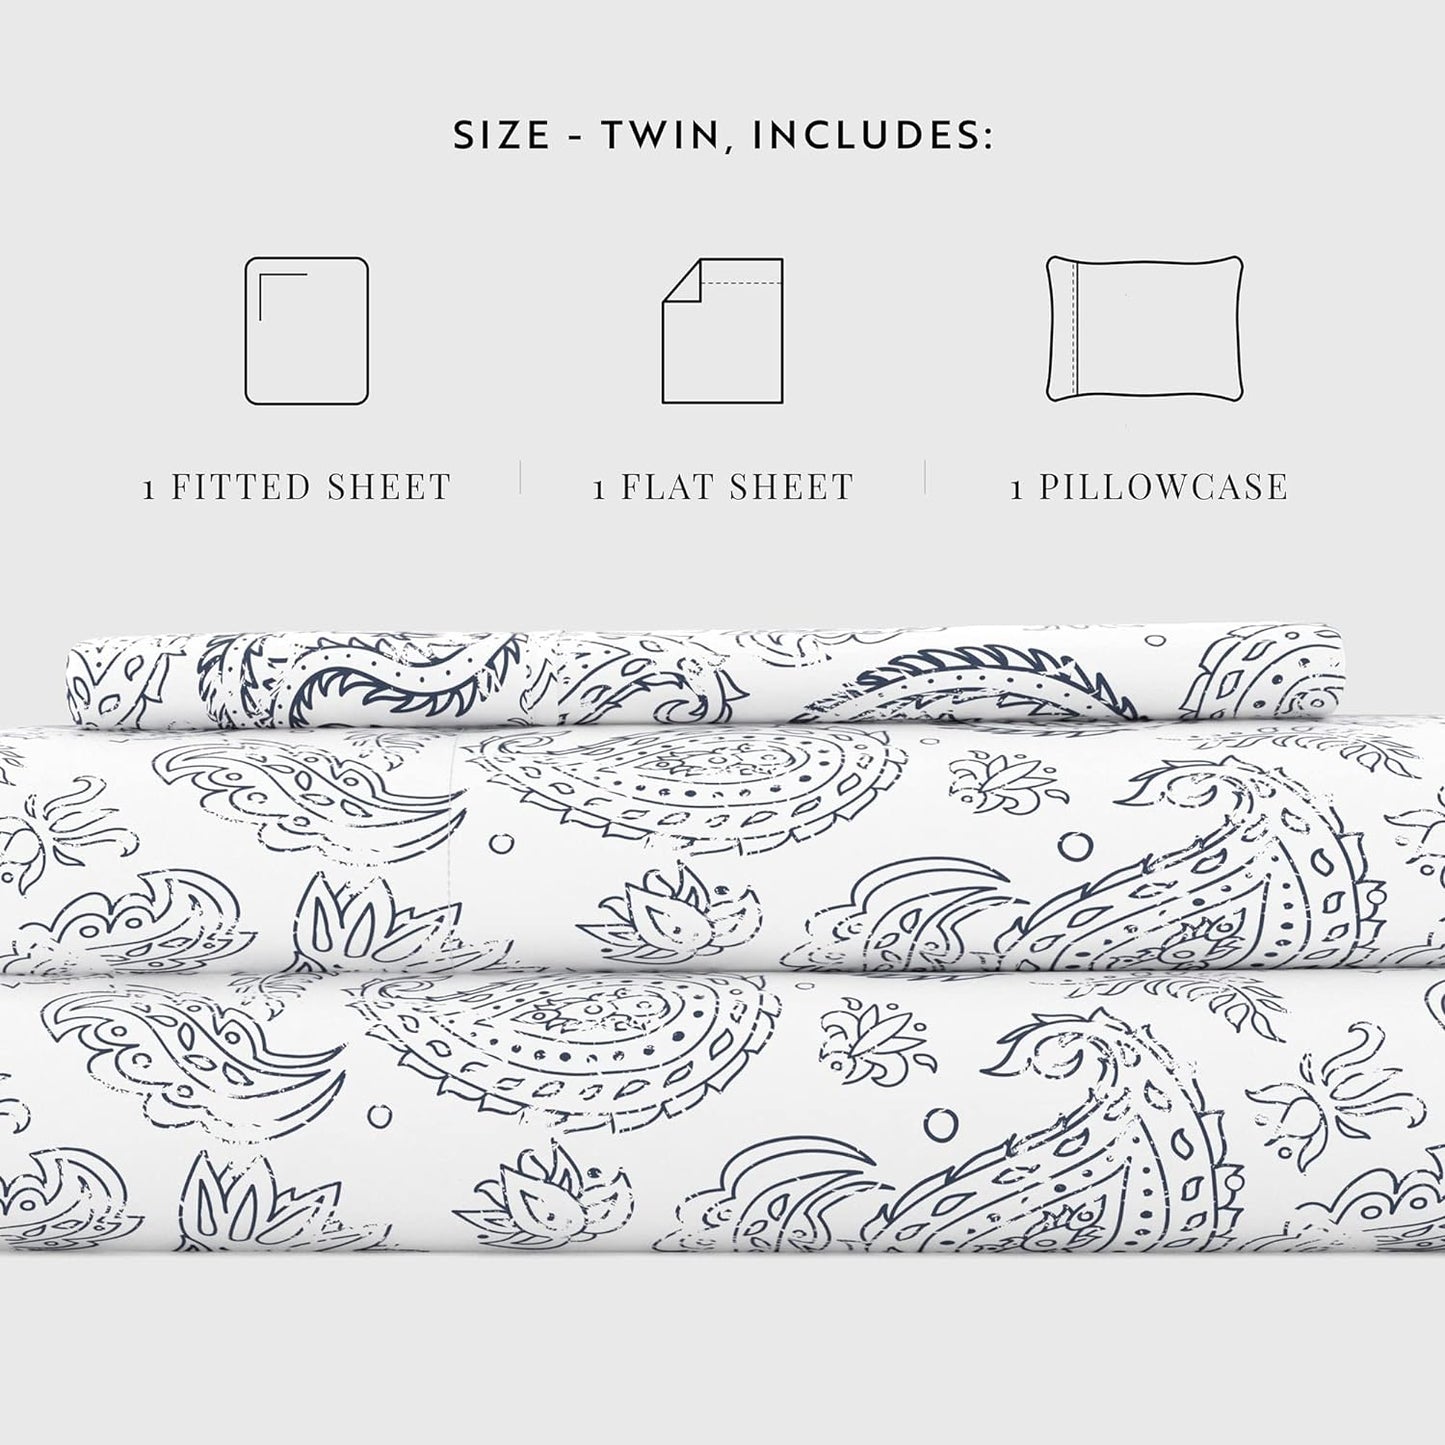 Linen Market 3 Piece Twin Bedding Sheet Set (Navy Floral) - Sleep Better Than Ever with These Ultra-Soft & Cooling Bed Sheets for Your Twin Size Bed - Deep Pocket Fits 16" Mattress